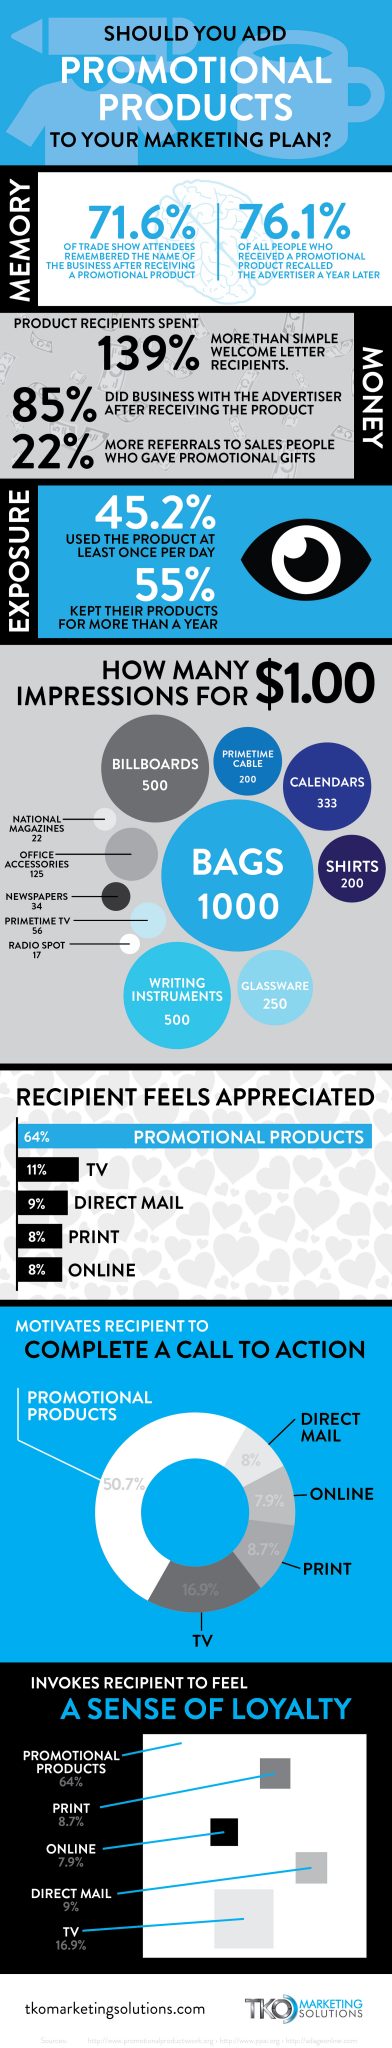 promotional_products_infographic_by_TKO_Marketing_Solutions